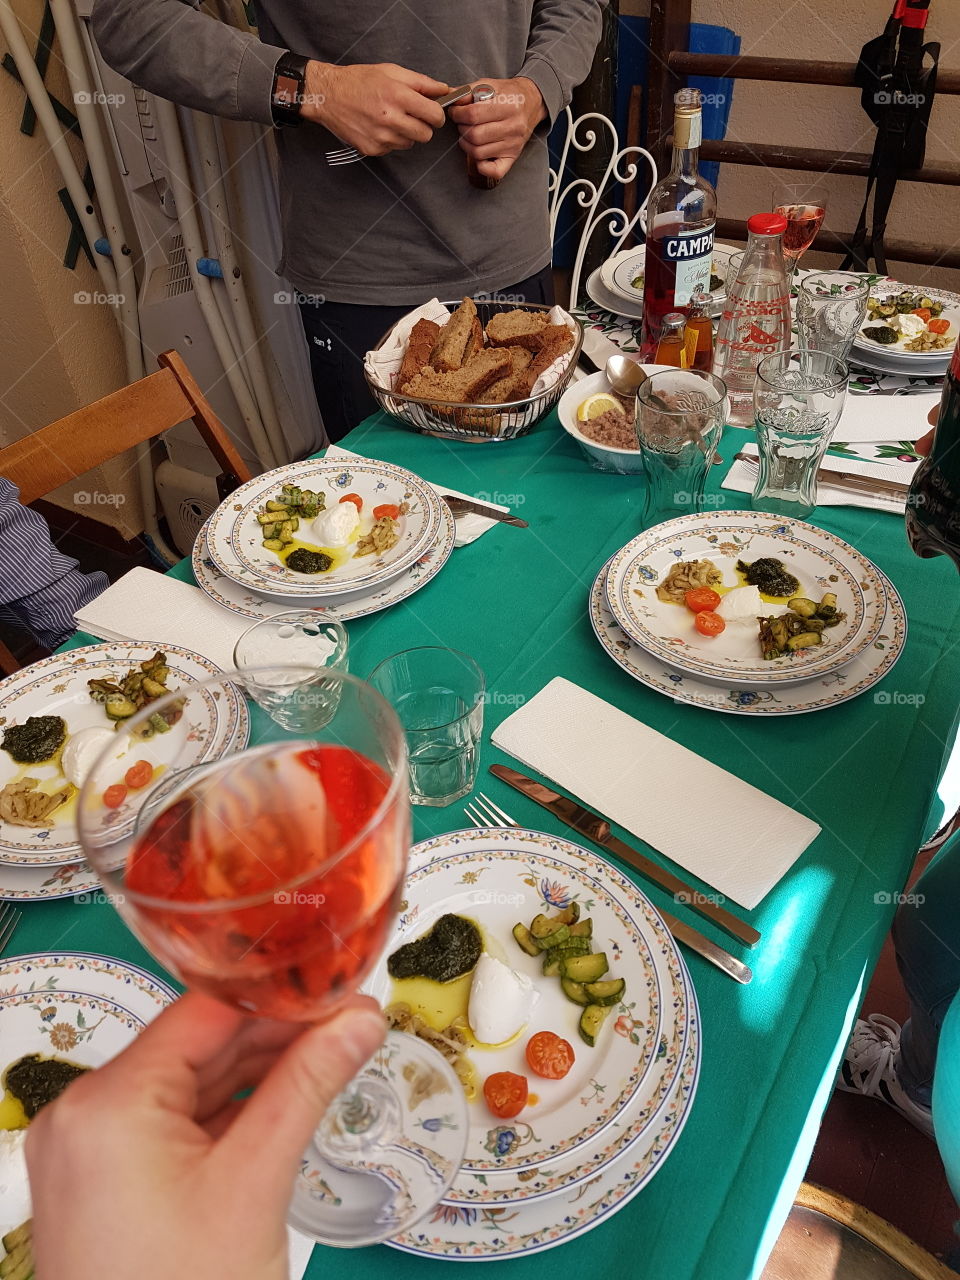 Happy toast with Campari and mixed appetizer